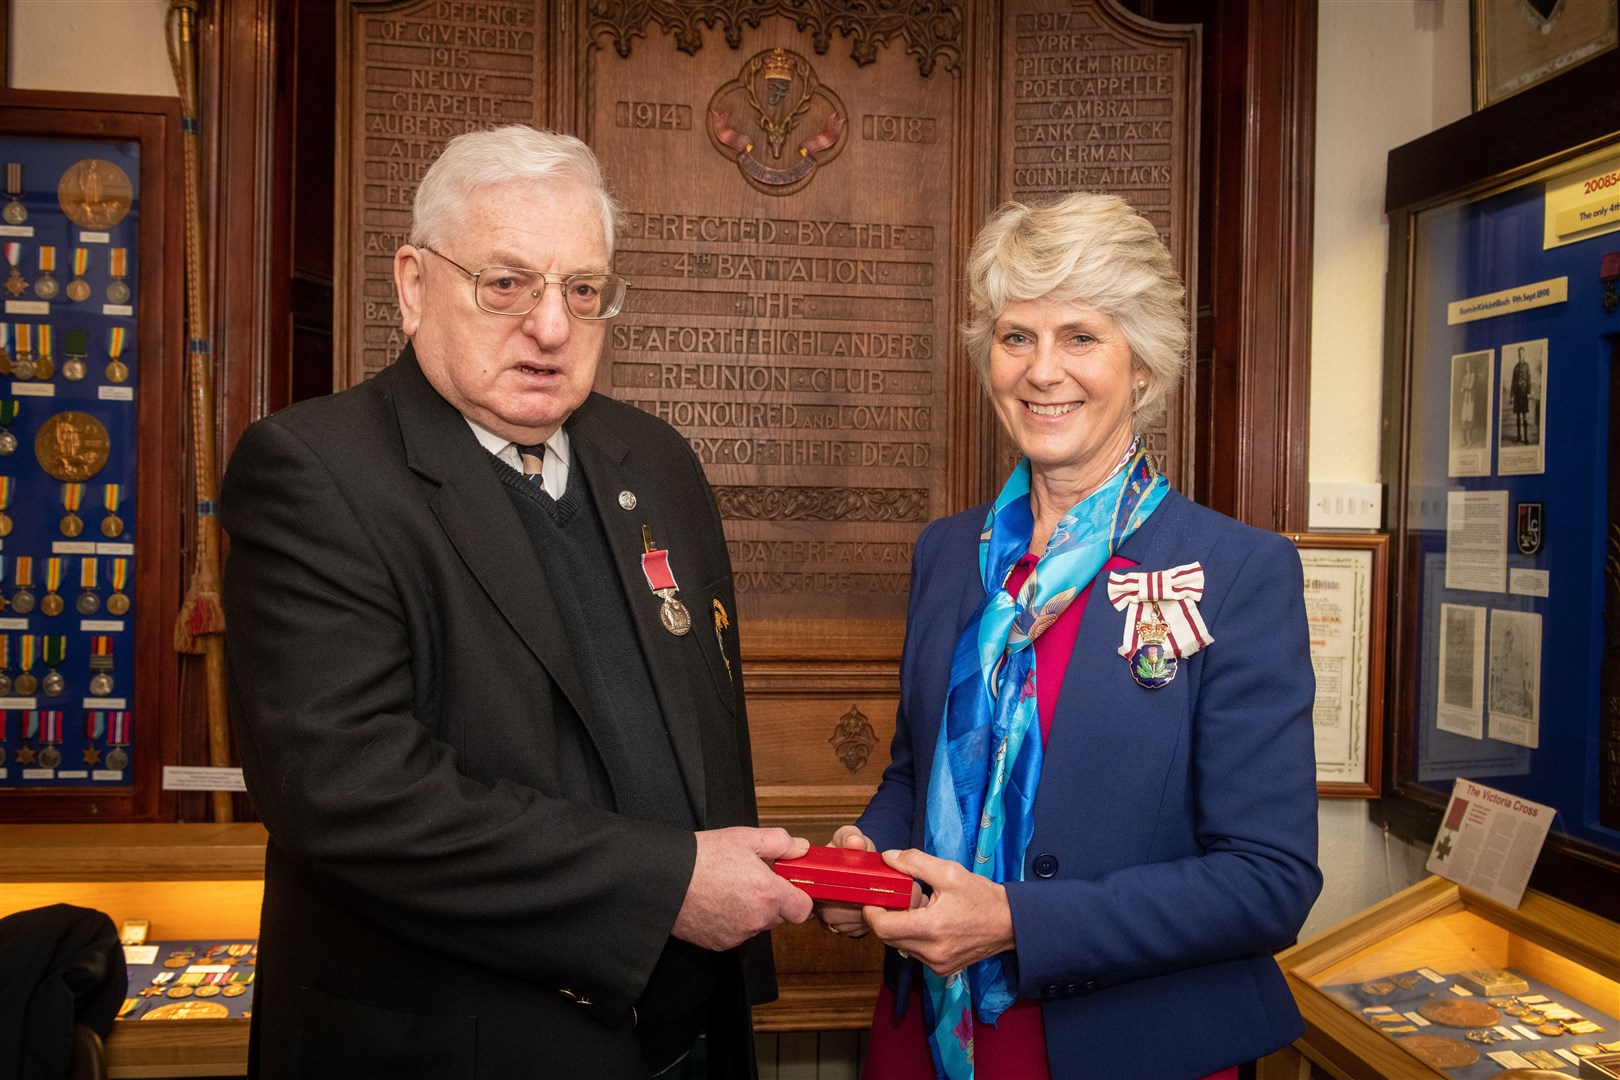 Presentation of British Empire Medal to Bob Shanks in Dingwall Museum by Joanie Whiteford, Lord Lieutenant of Ross and Cromarty.